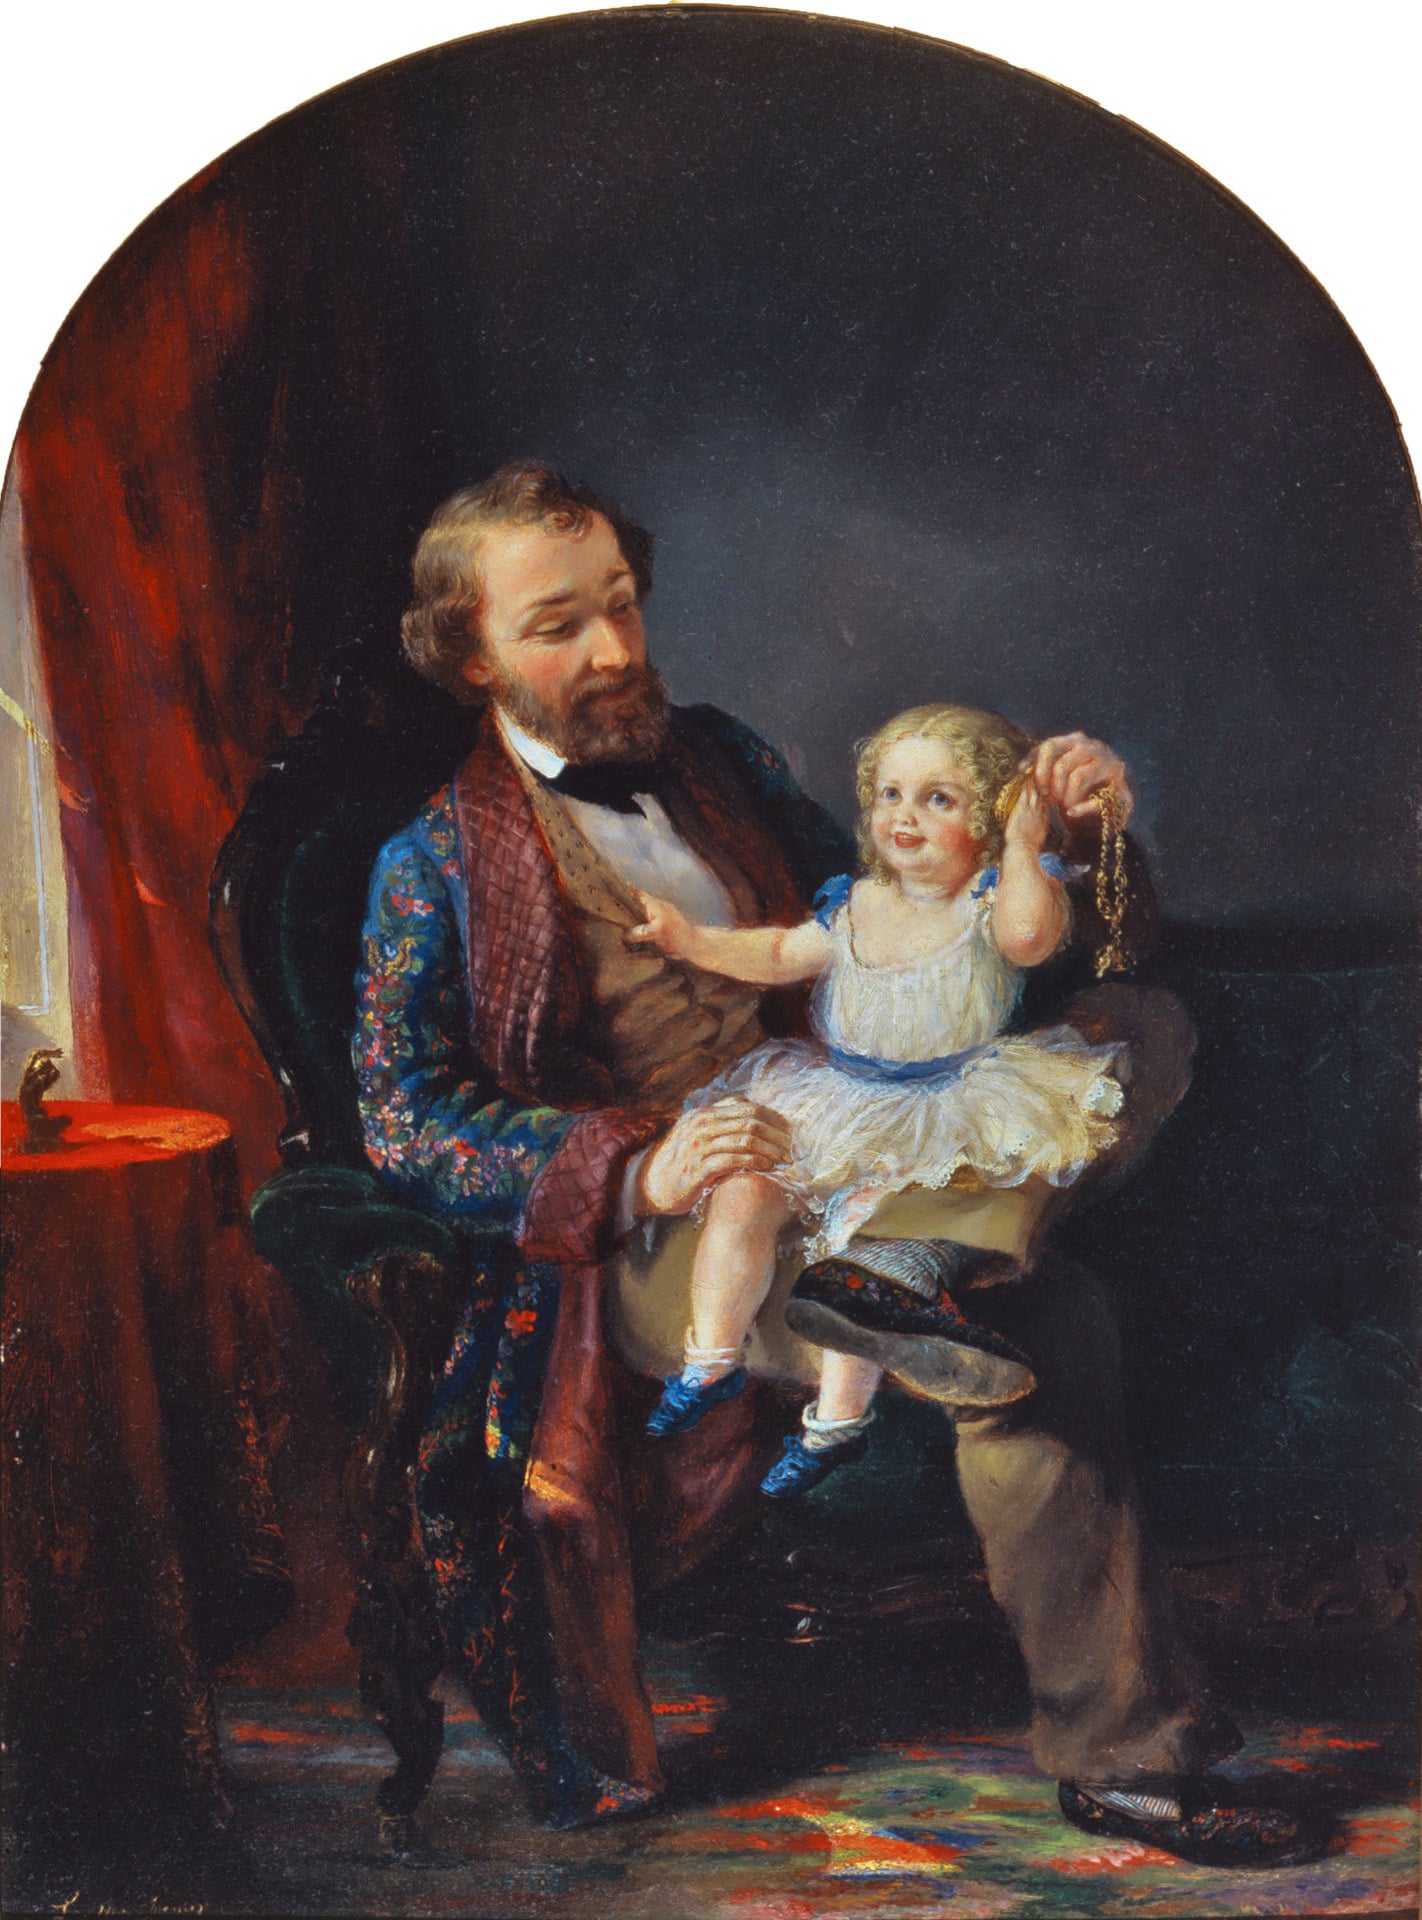 a painting of a young girl sitting on a man's lap holding a pocket watch